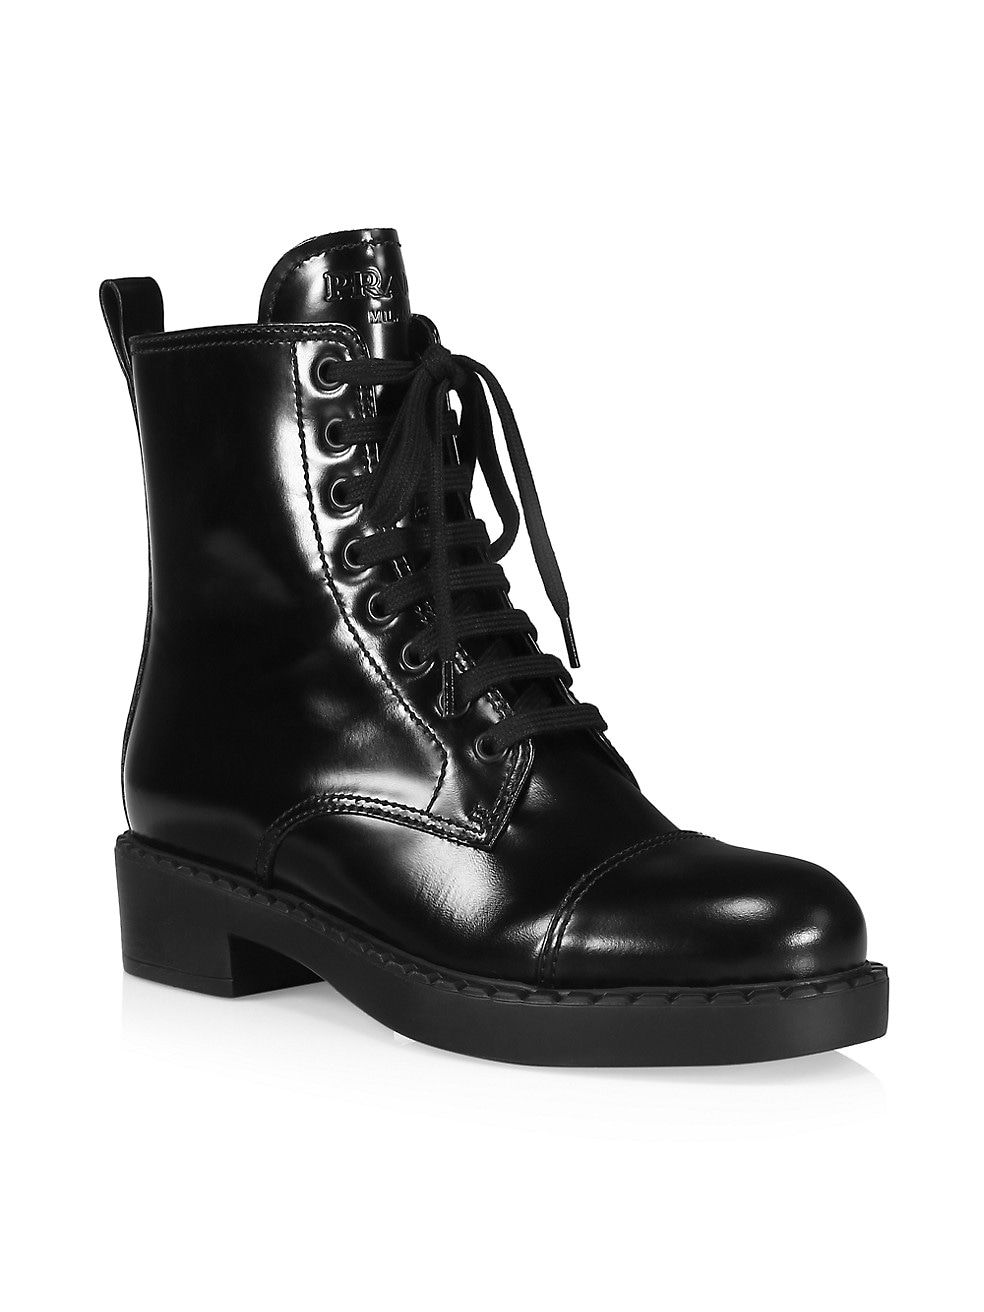 Prada 38 Lace-Up Leather Combat Boots | Saks Fifth Avenue